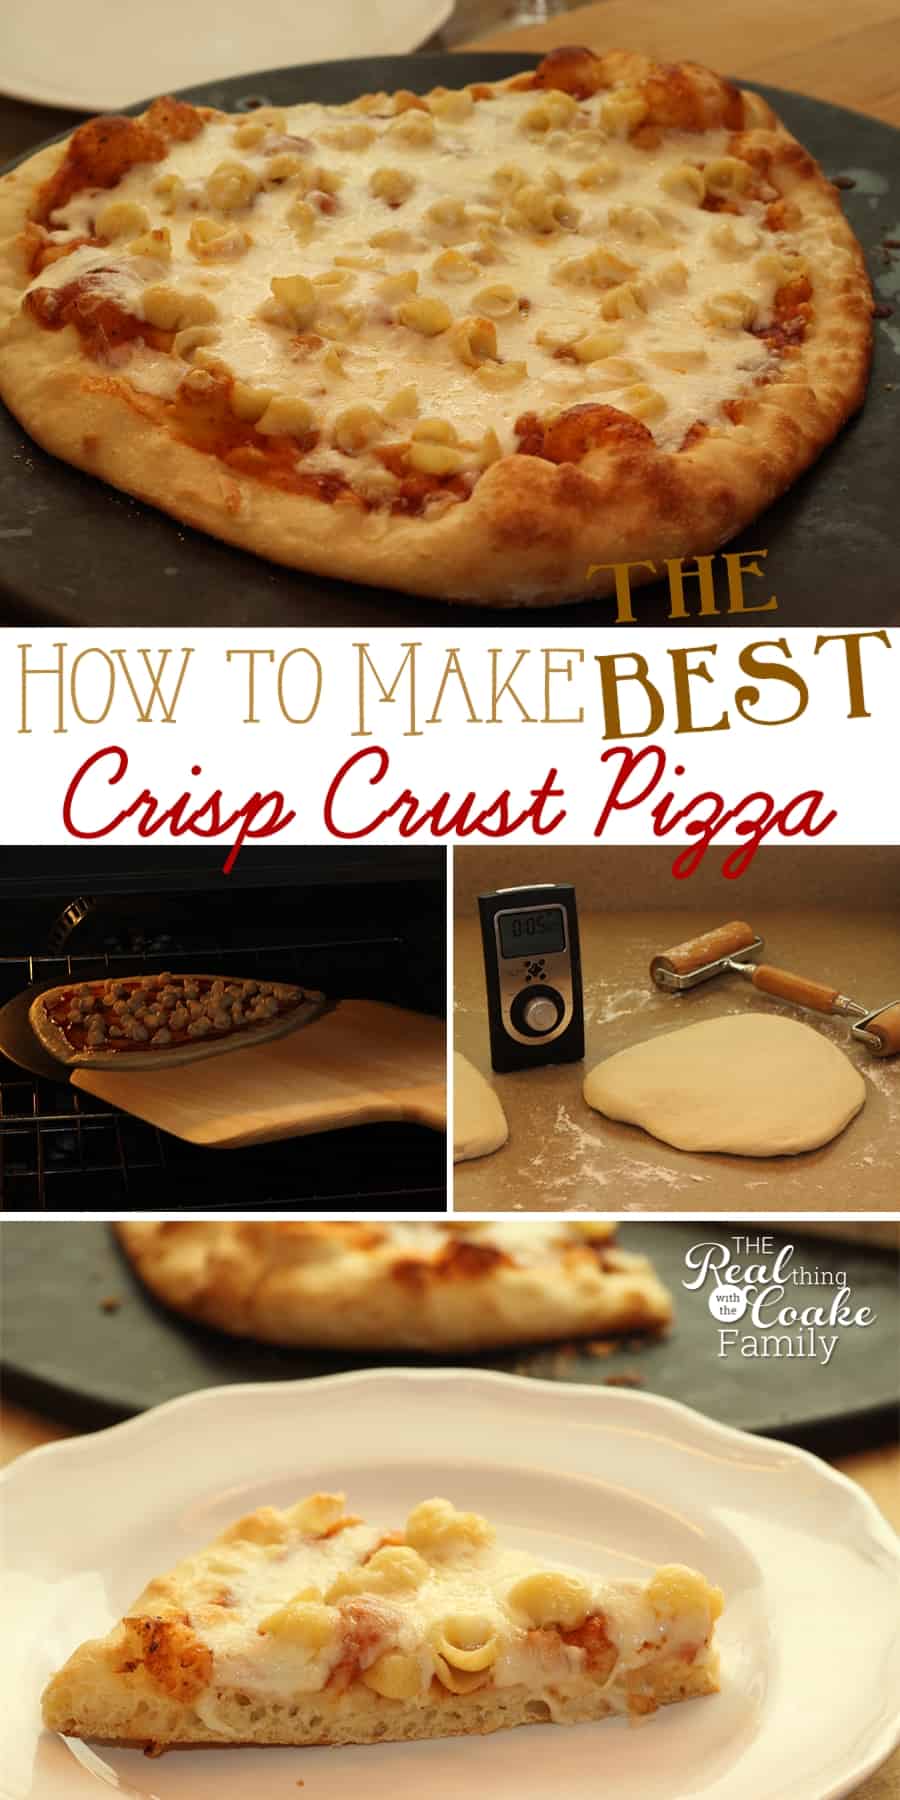 How to make pizza ~ The best way to make pizza at home so you get a delicious crisp crust. Yum...can't wait for dinner! #Recipe #Pizza #HowtoMakePizza #RealCoake